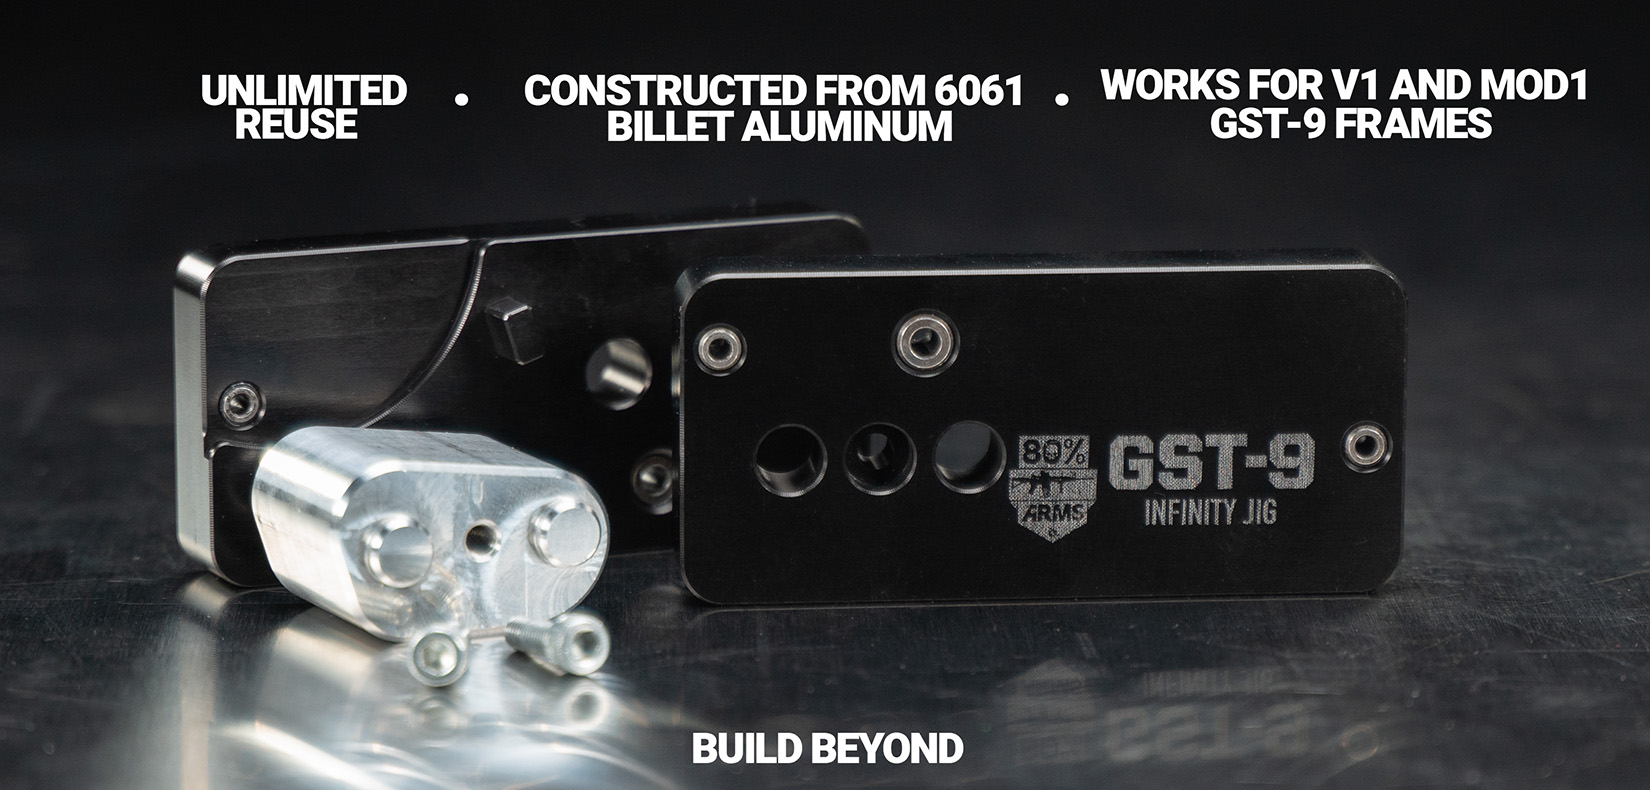 The New GST-9 Infinity Jig